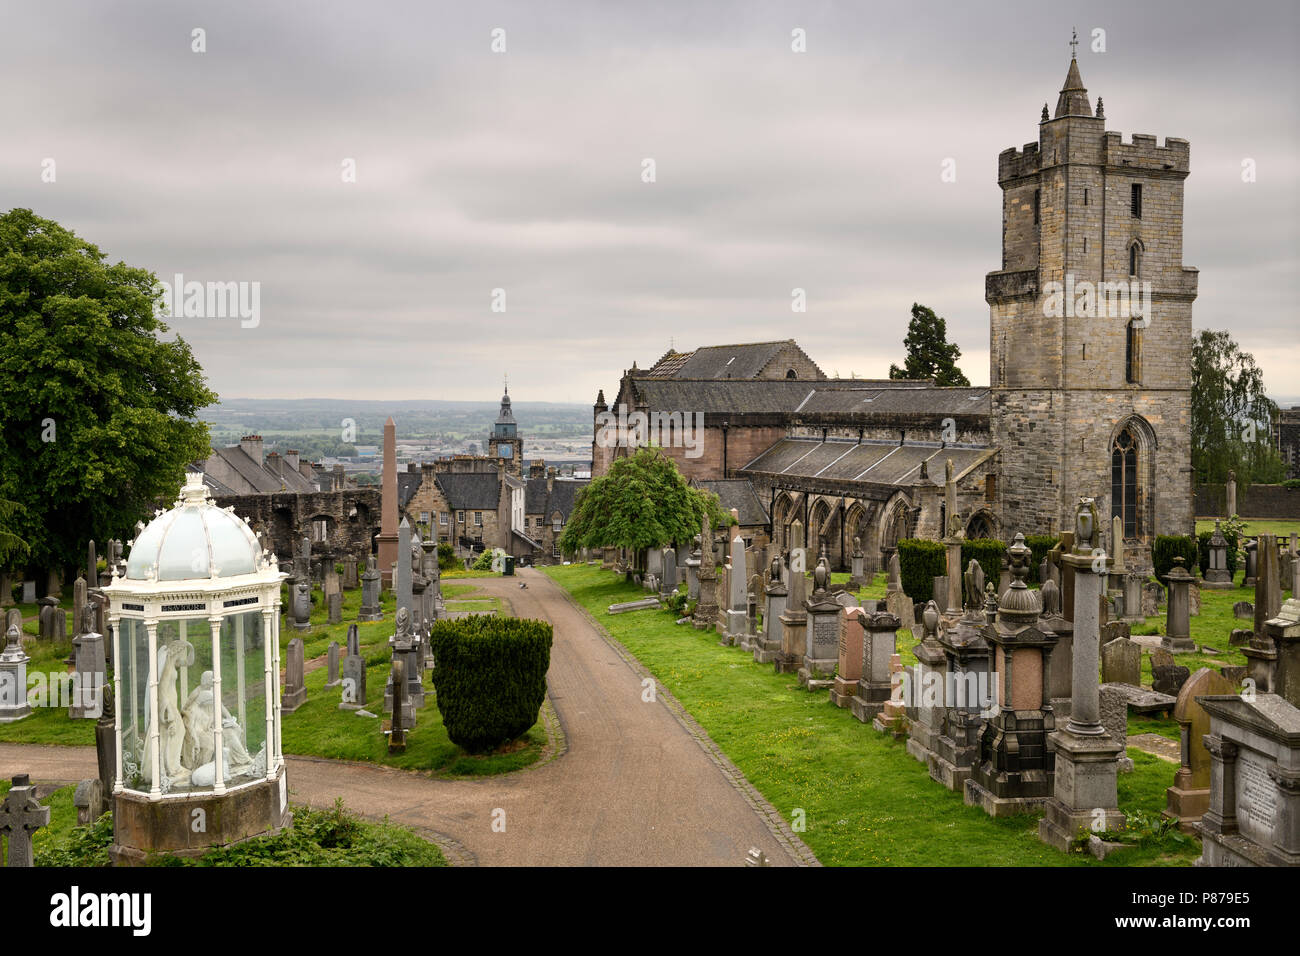 Church of the Holy Rude with Bell tower and Royal Cemetery with historic gravestones and memorials on Castle Hill above Stirling Scotland UK Stock Photo